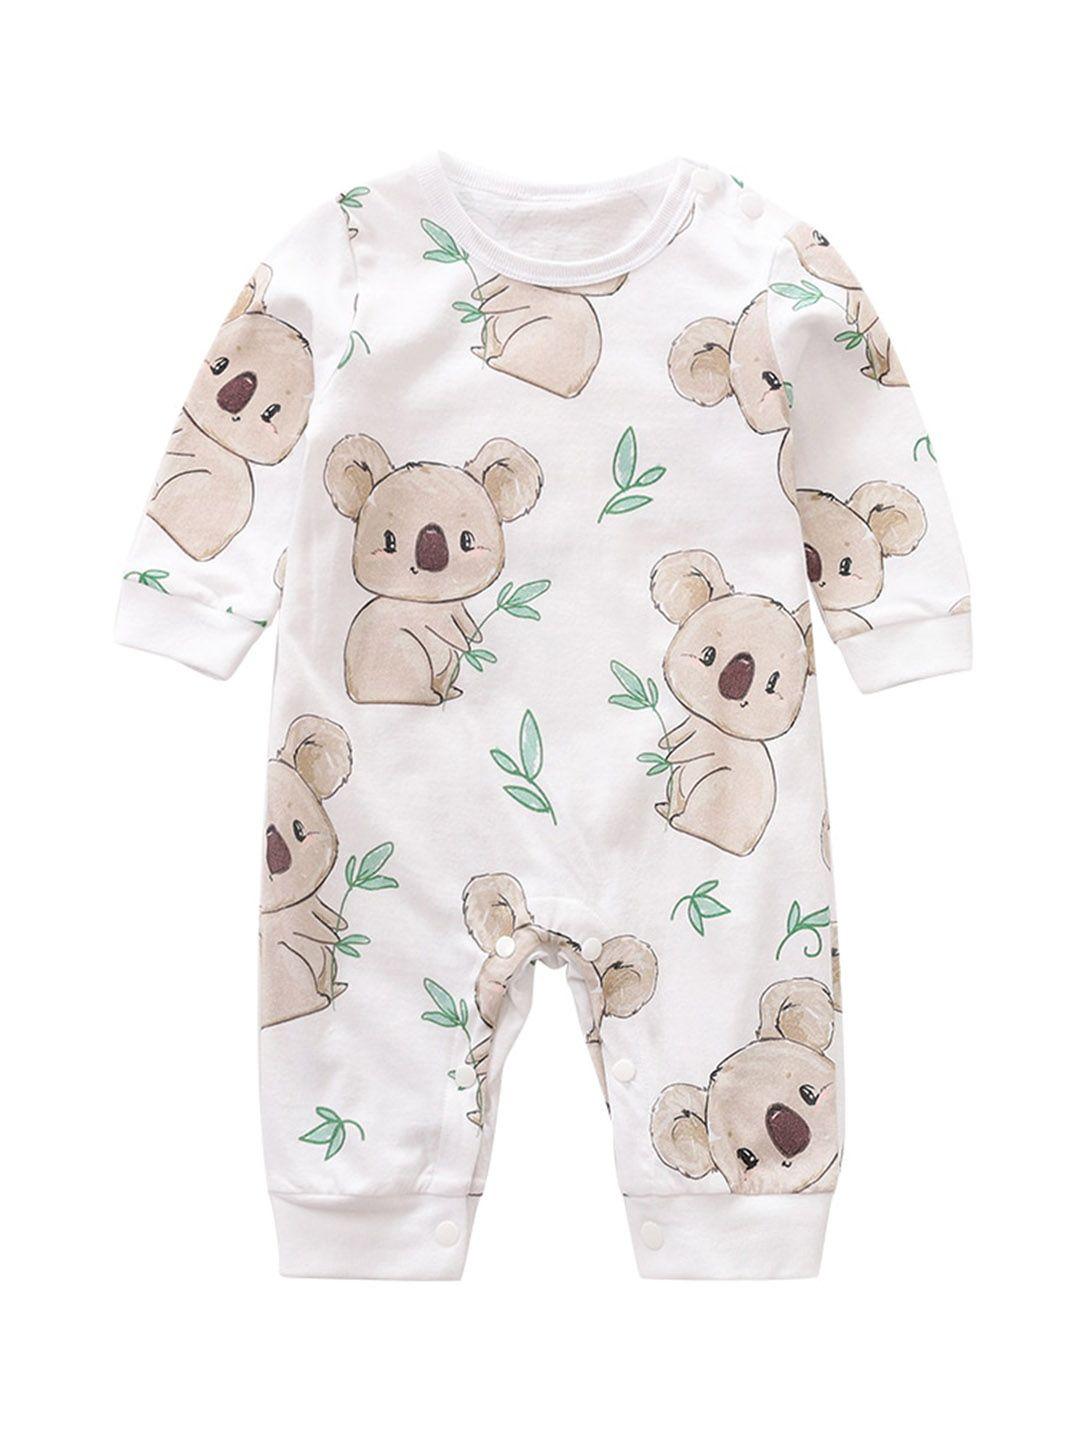 stylecast infants white conversational printed cotton rompers